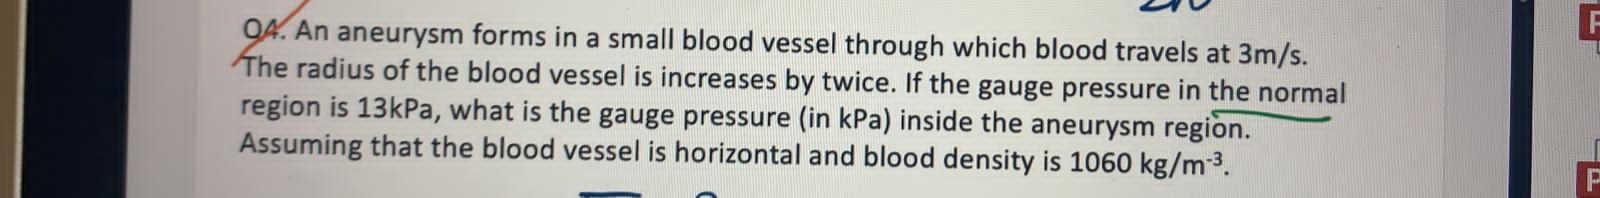 04. An aneurysm forms in a small blood vessel through which blood travels at 3m/s.
The radius of the blood vessel is increases by twice. If the gauge pressure in the normal
region is 13kPa, what is the gauge pressure (in kPa) inside the aneurysm region.
Assuming that the blood vessel is horizontal and blood density is 1060 kg/m-3.
